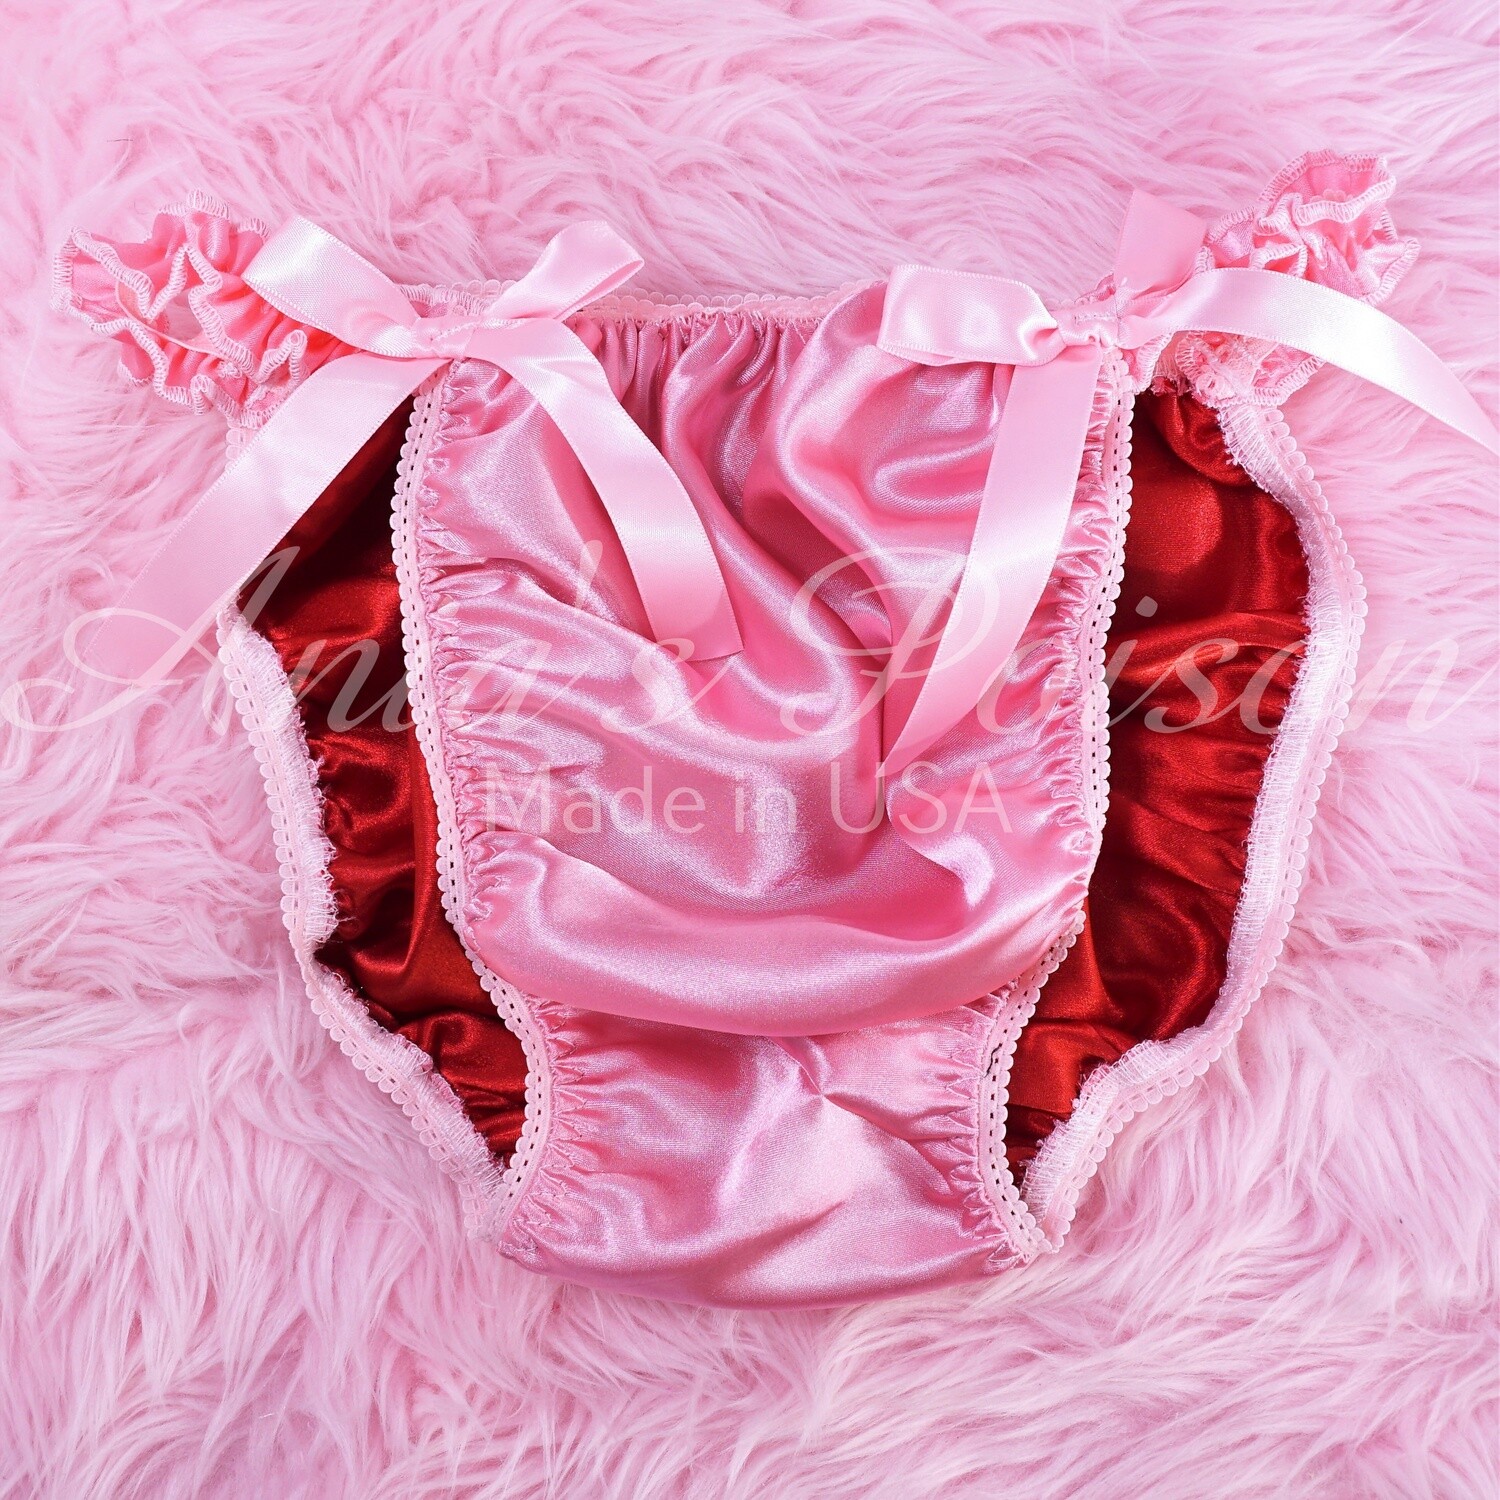 Double Lined Satin Panties female body